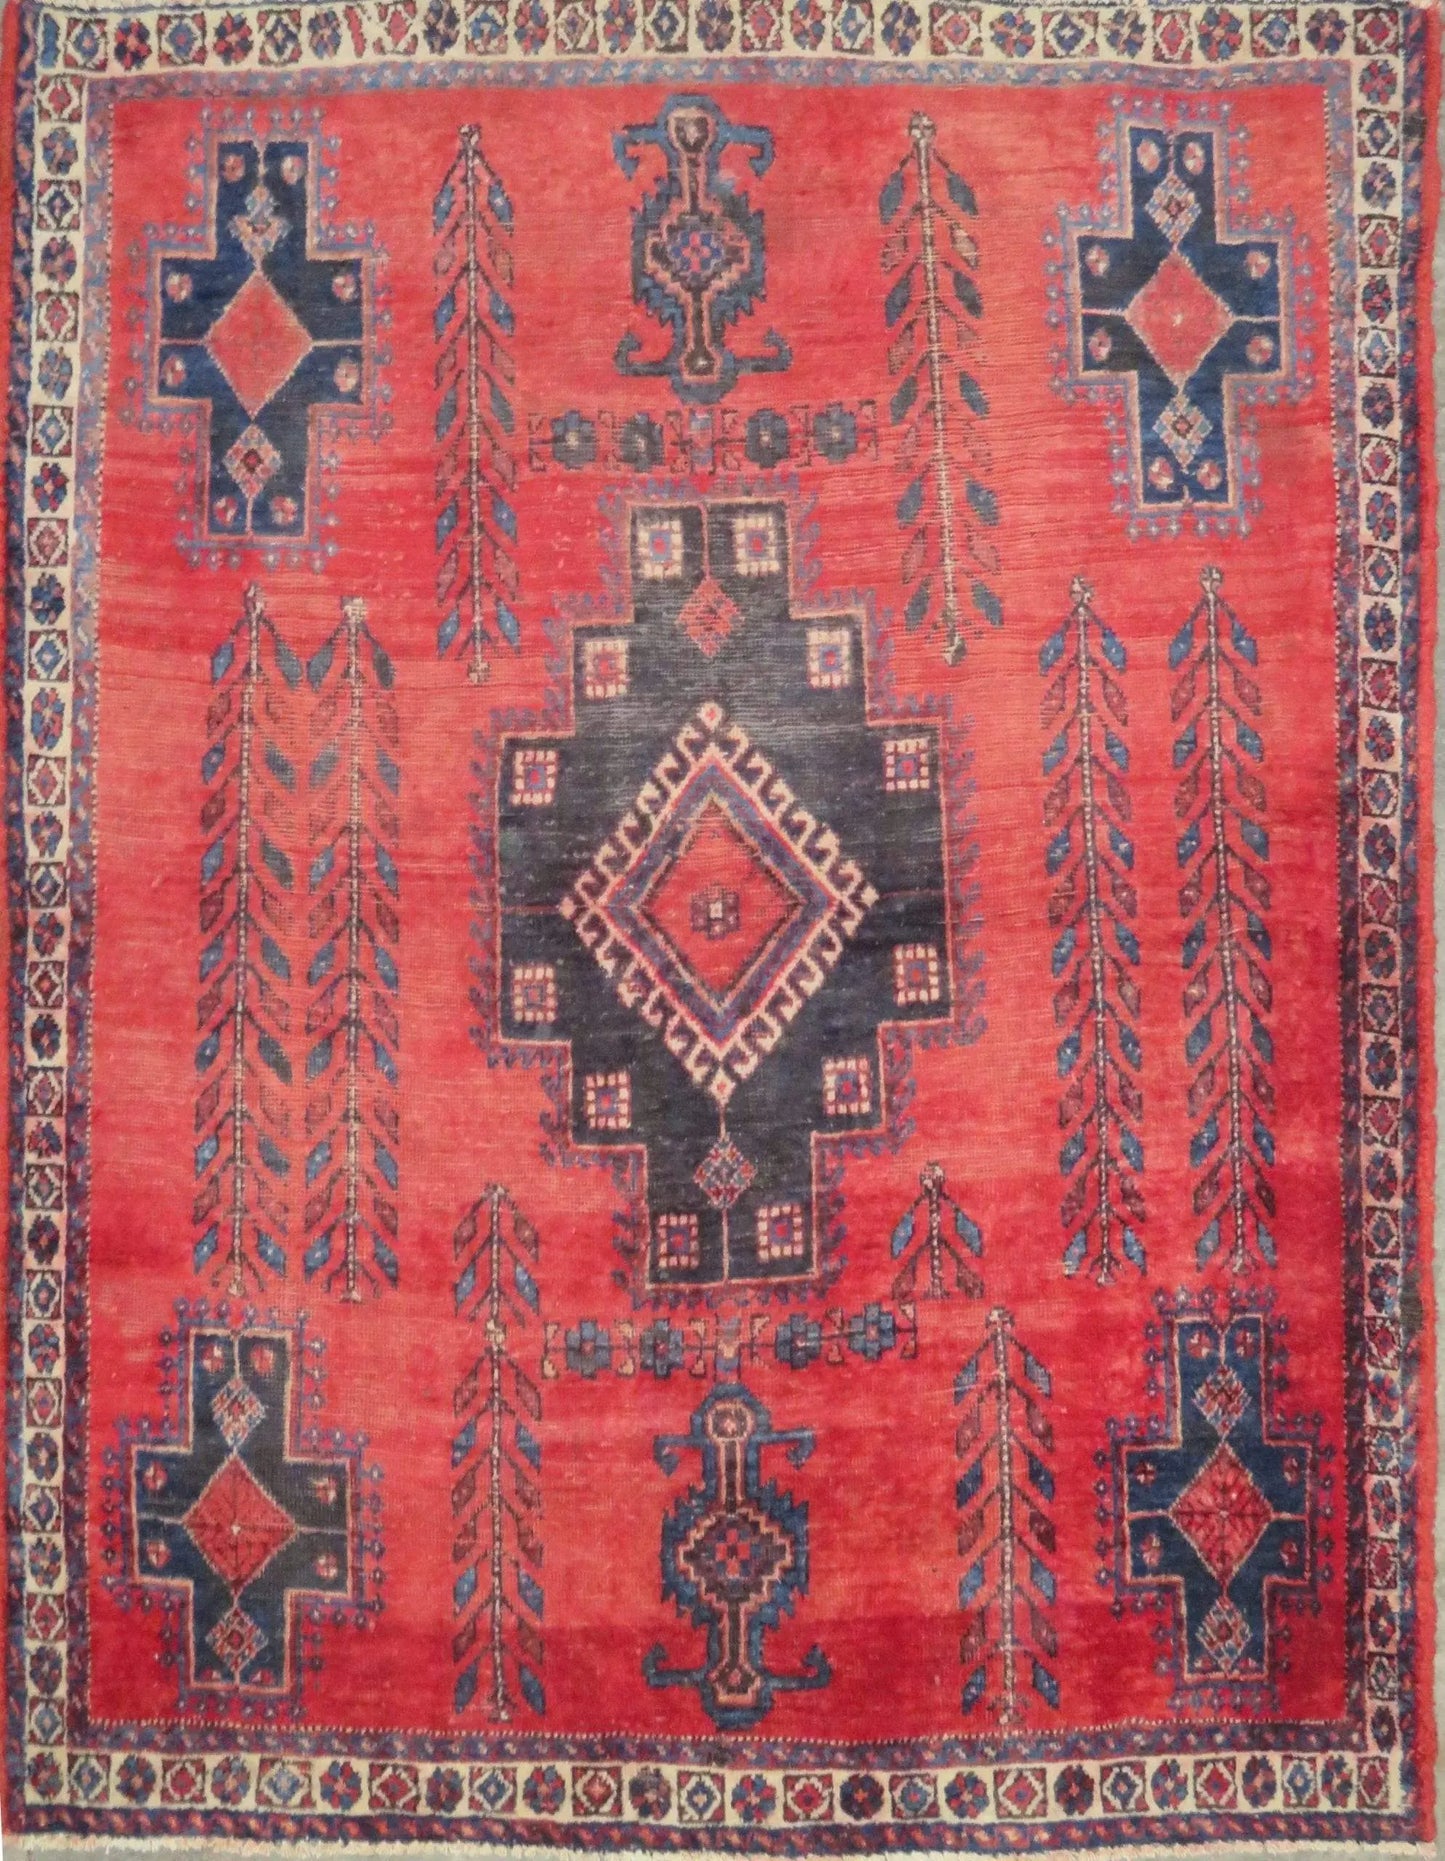 Hand-Knotted Vintage Rug 6'6" x 5'1"